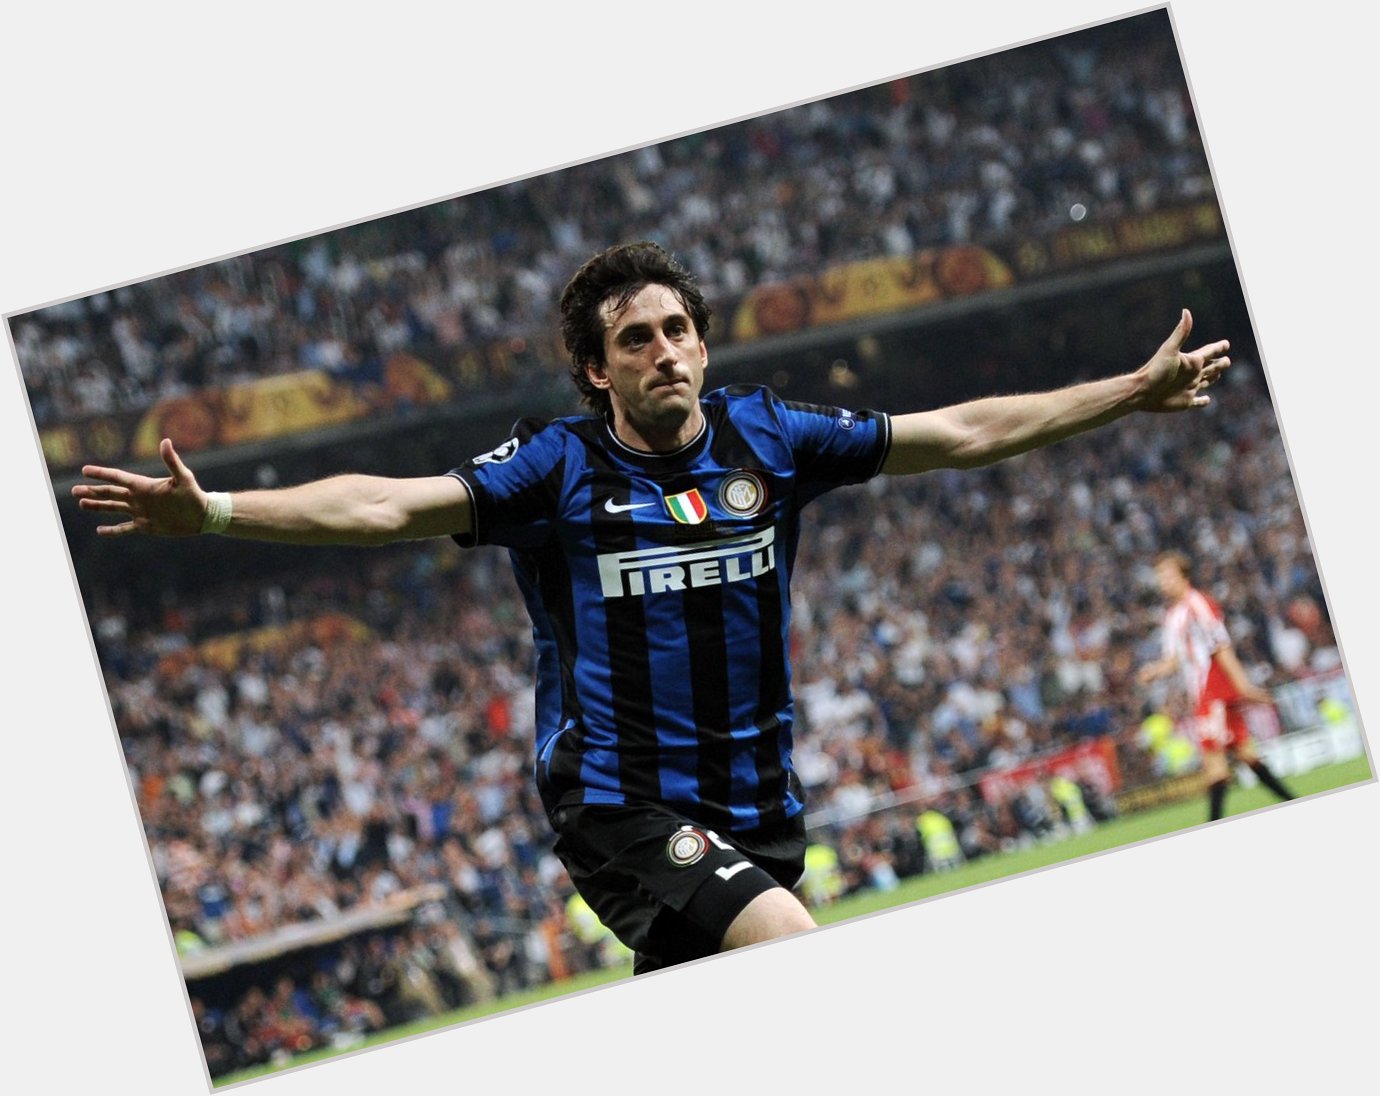 A happy birthday to 2010  winner Diego Milito who turns 3  8  today! 